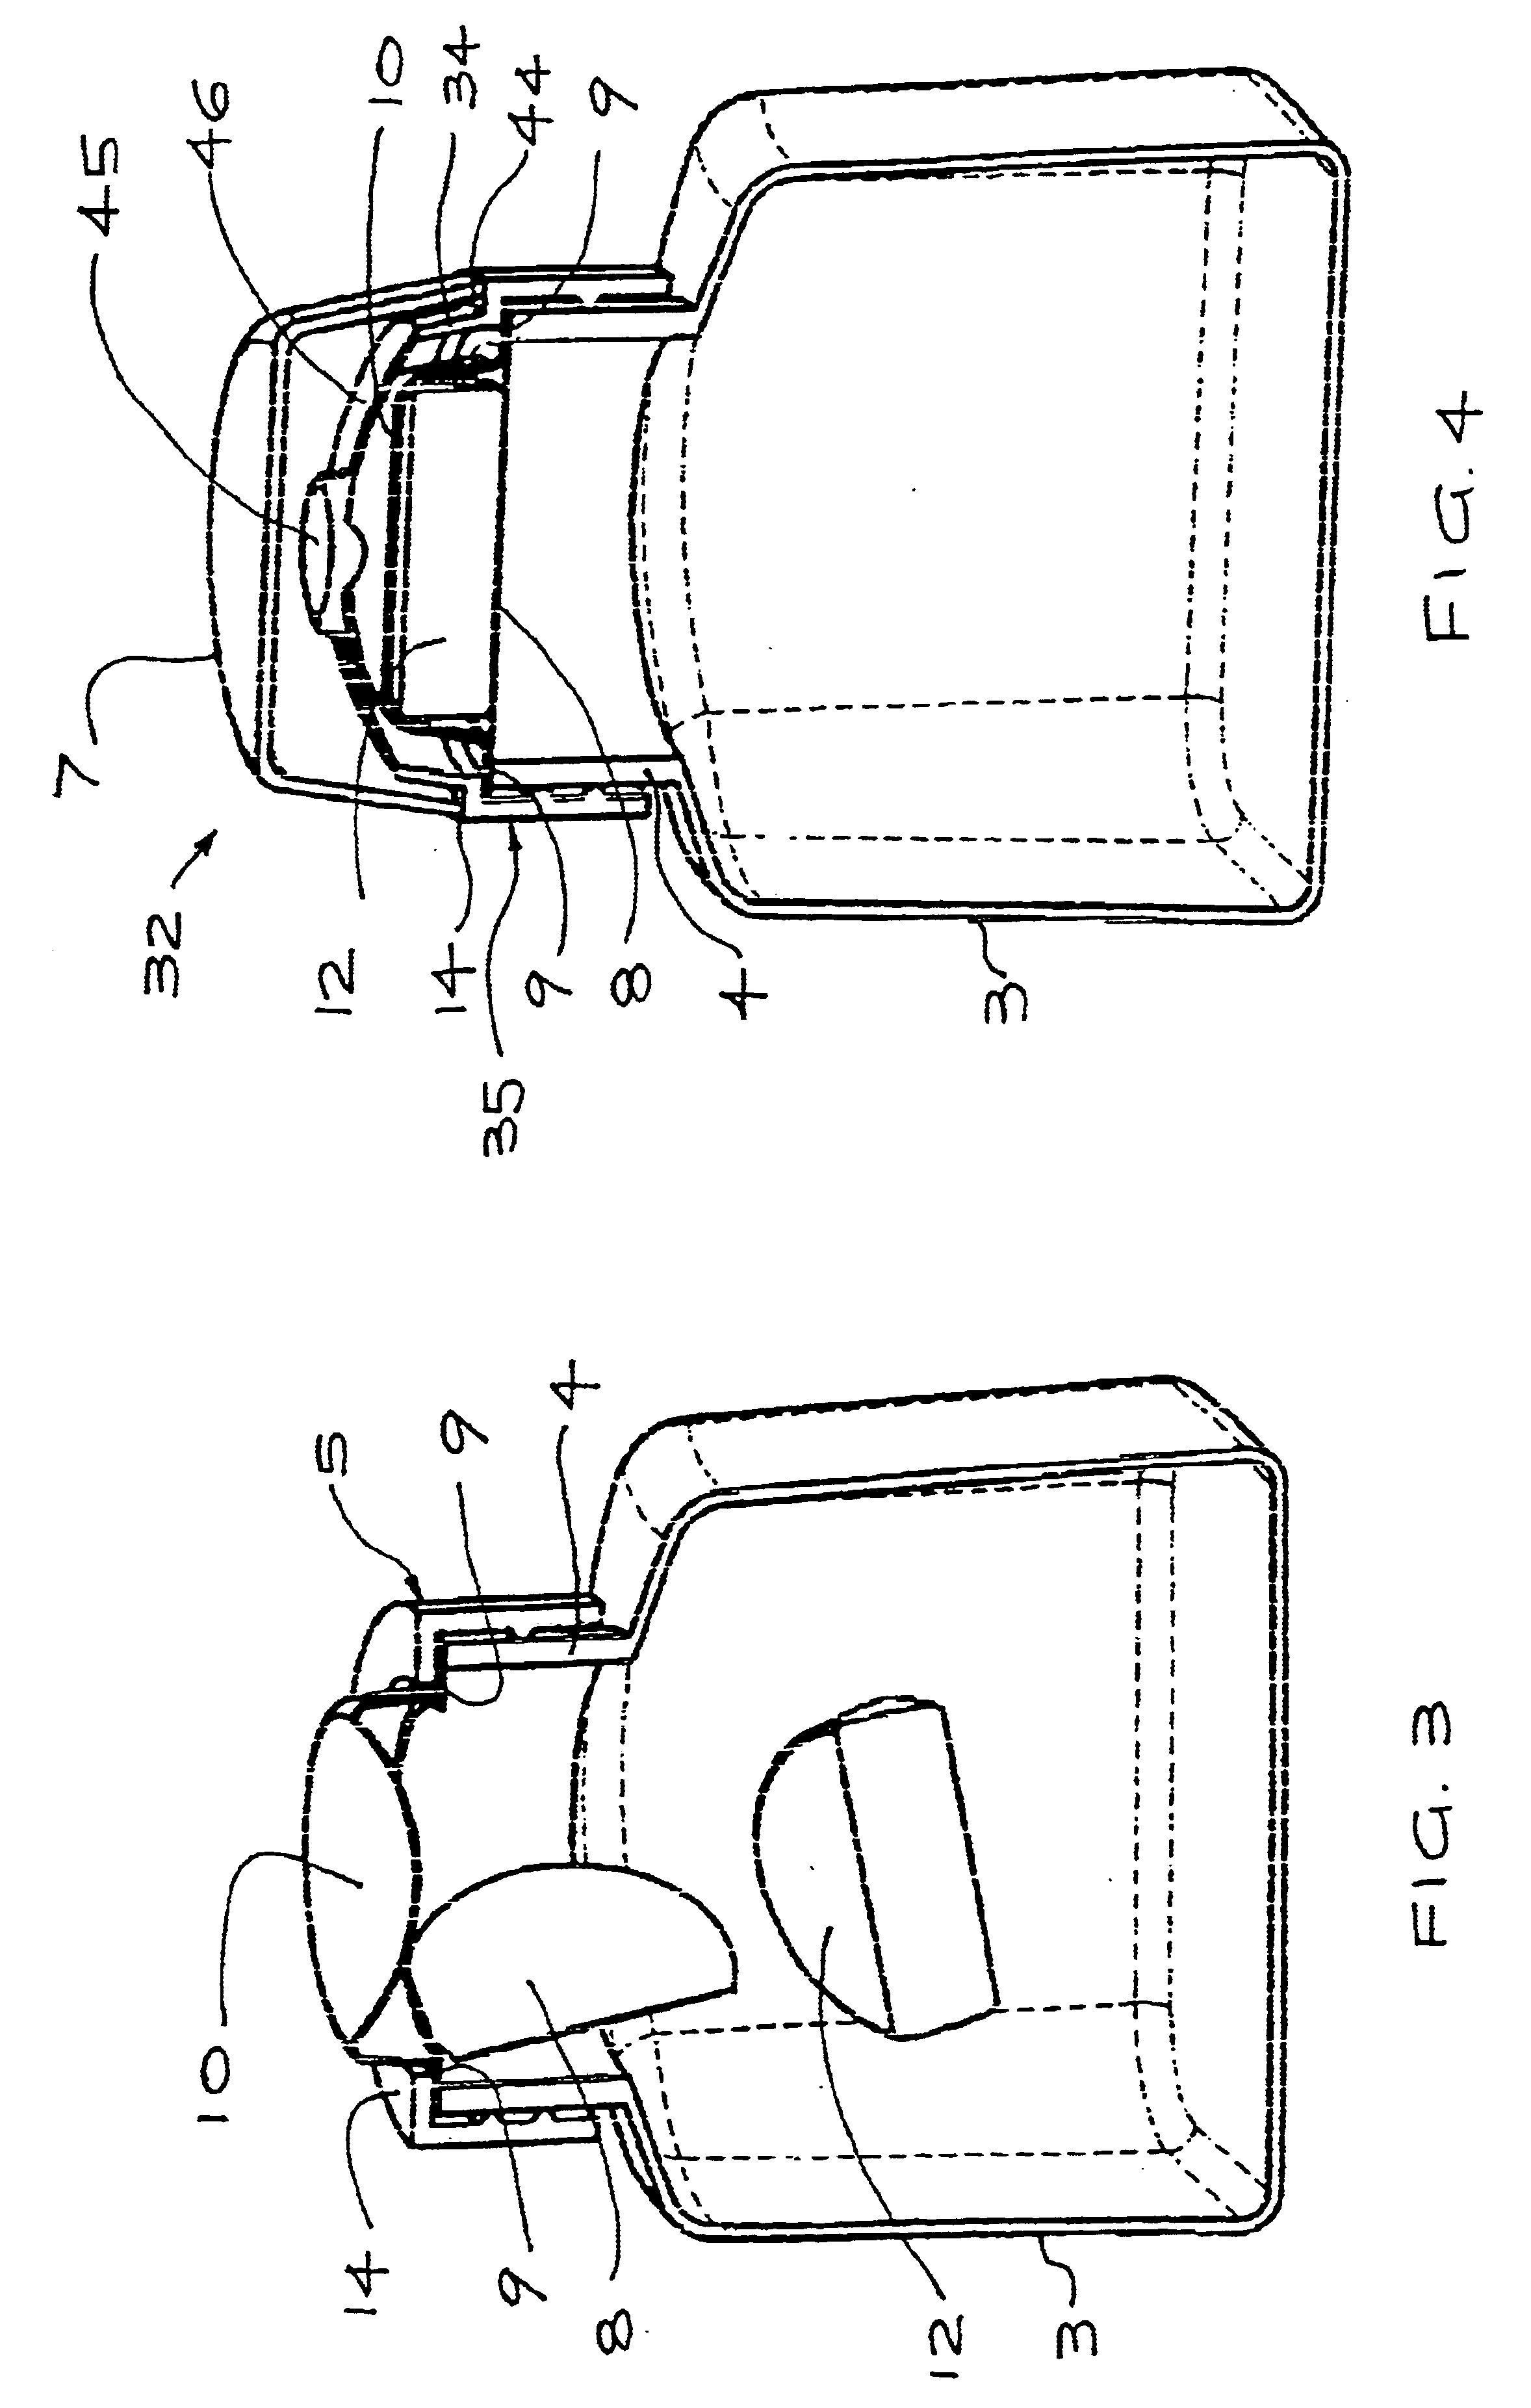 Discharge cap for releasable product